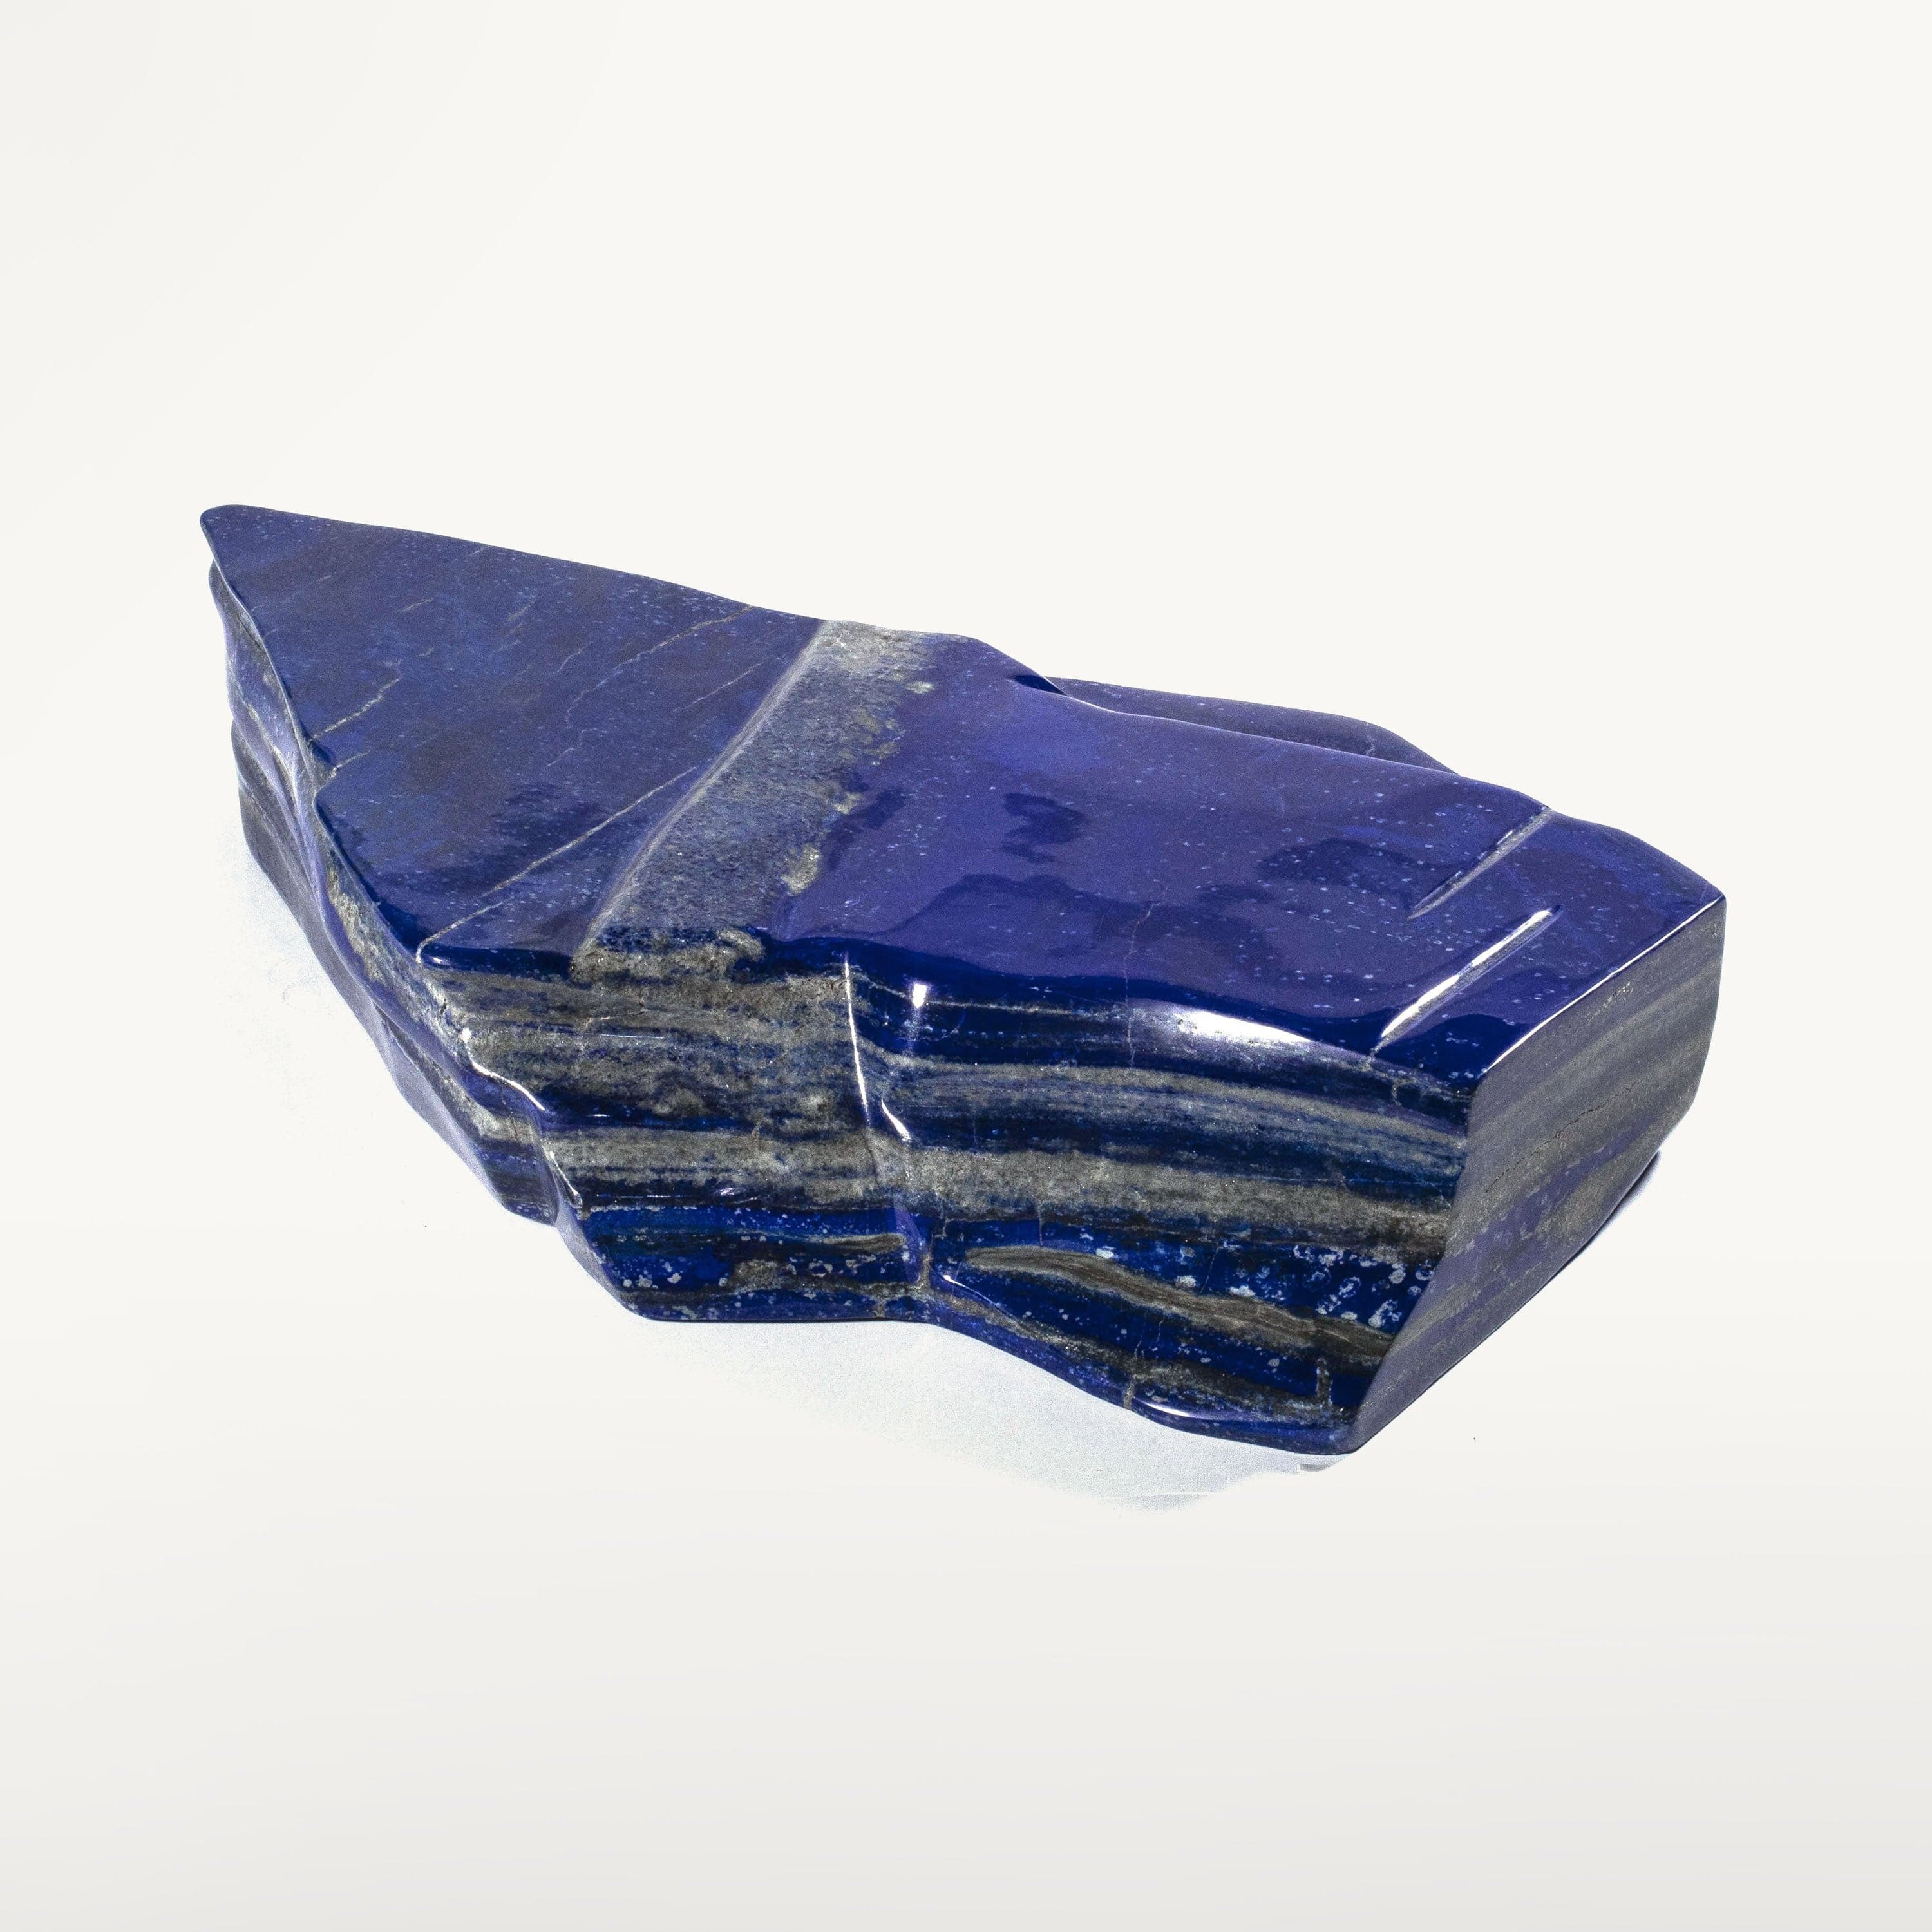 Kalifano Lapis Rare Natural Blue Polished Lapis Lazuli Freeform Carving from Afghanistan - 40.9 kg / 90.2 lbs LPS38000.001